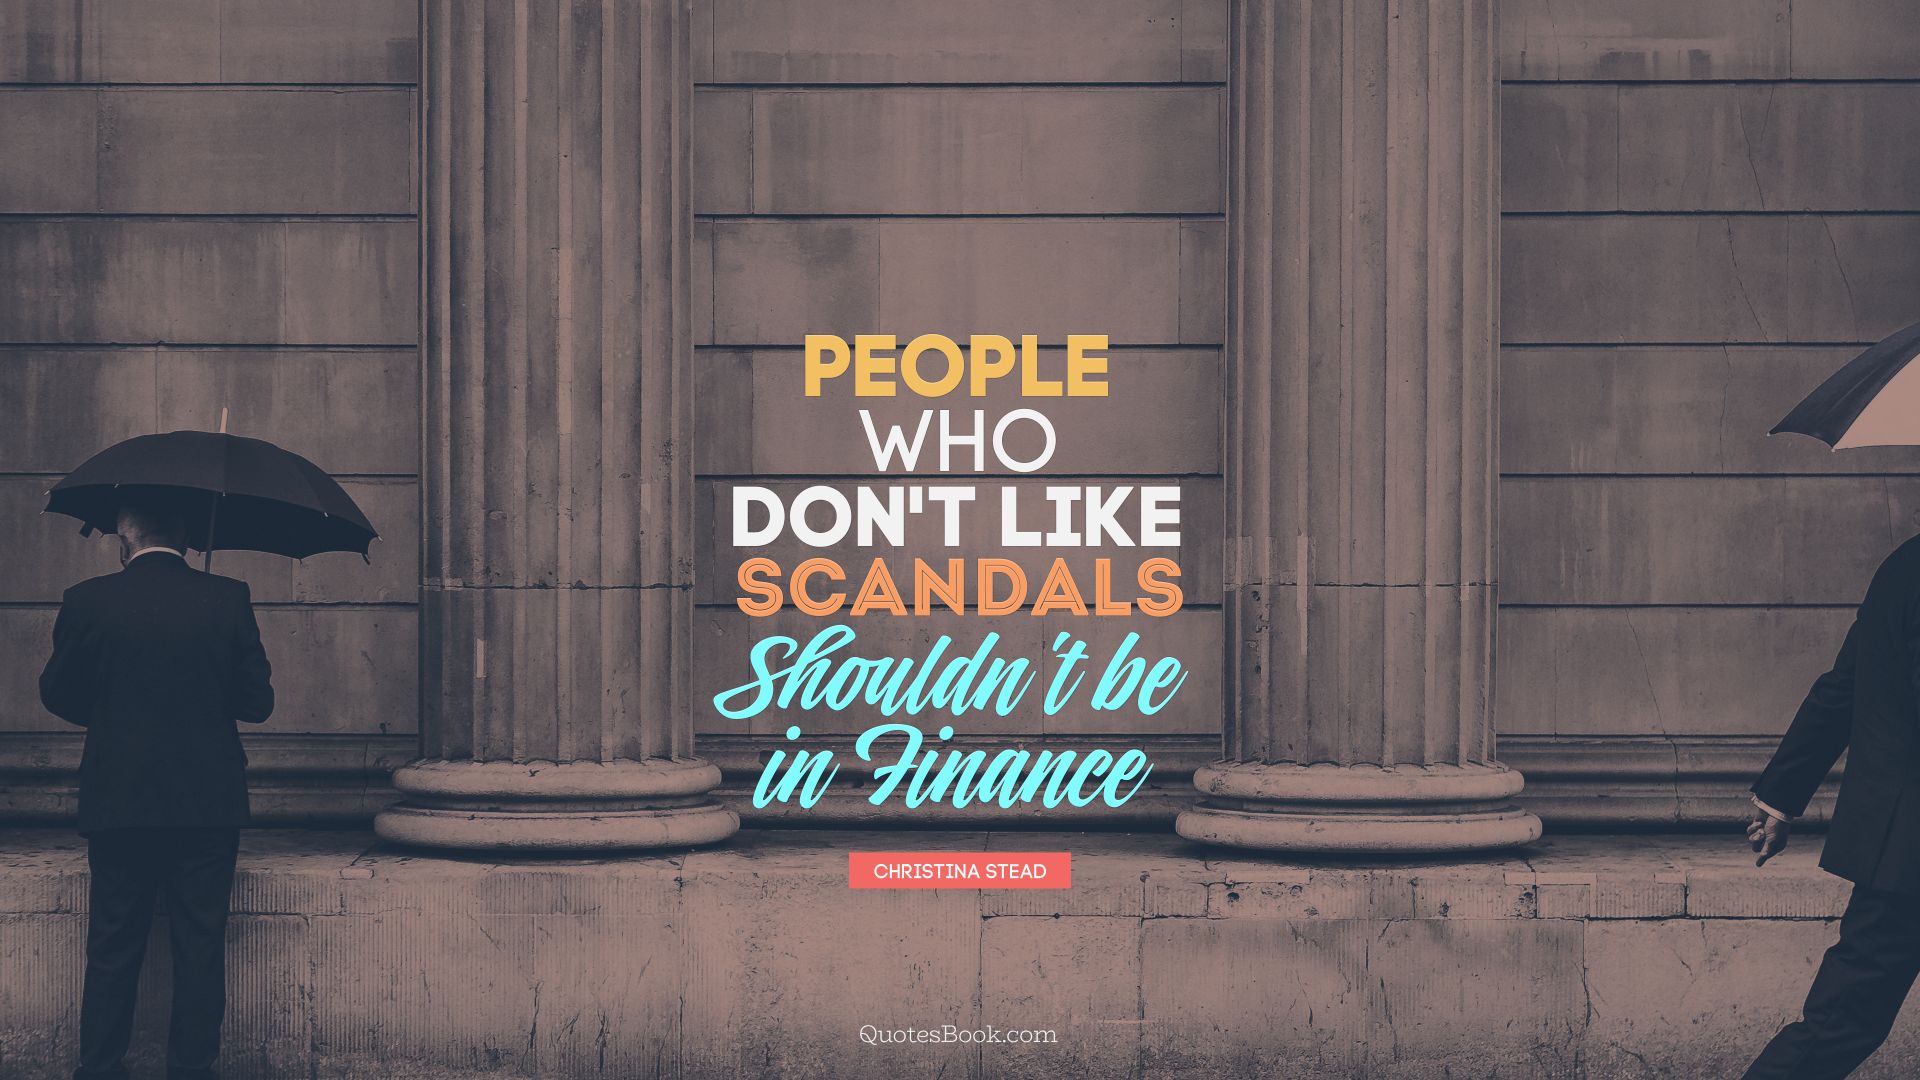 People who don't like scandals shouldn't be in finance. - Quote by Christina Stead